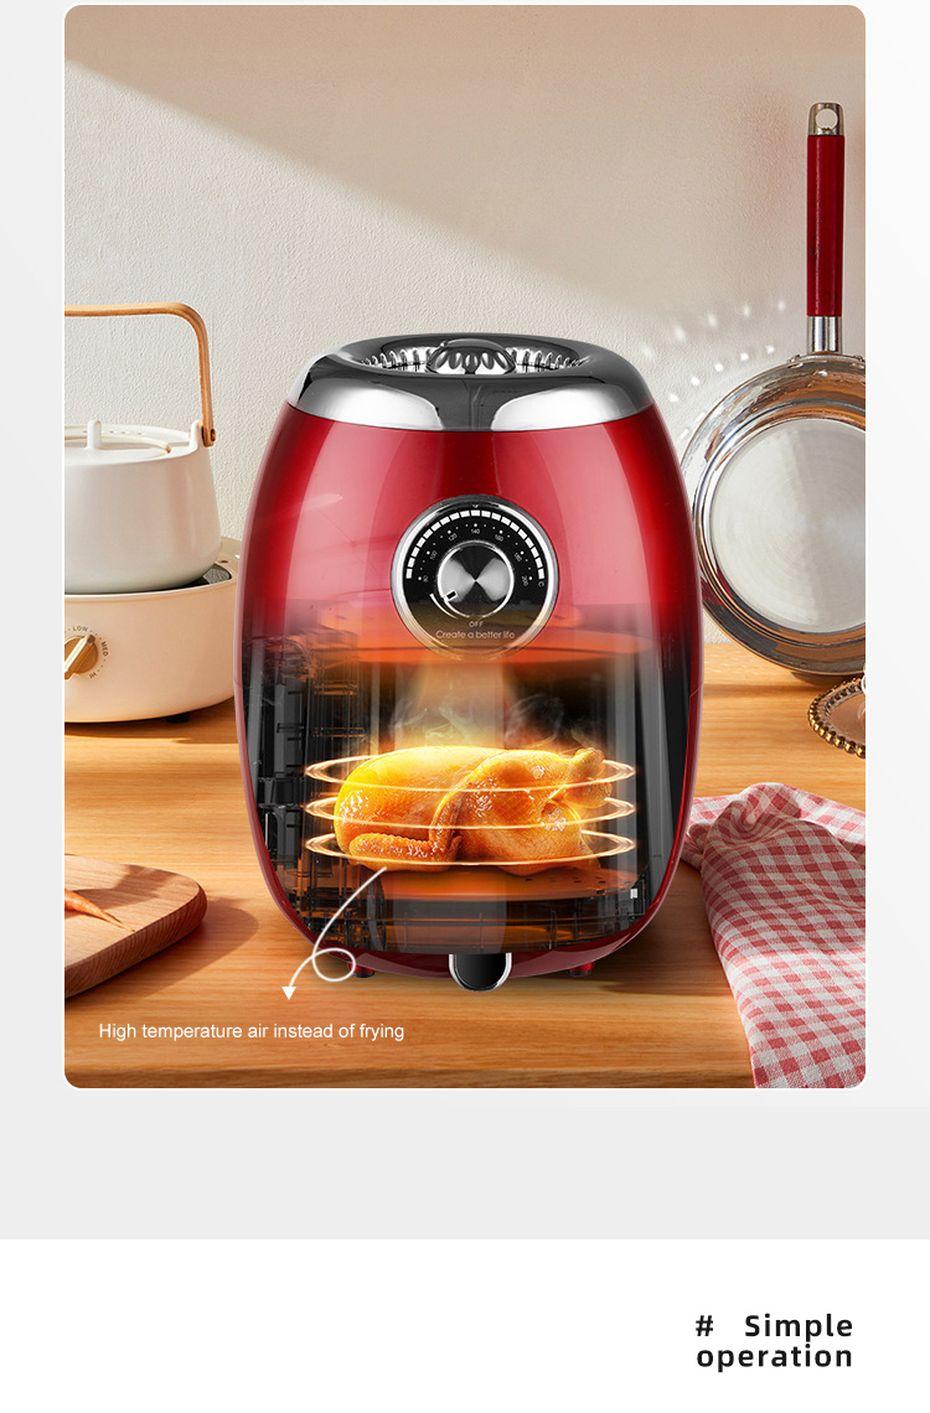 3L Air Fryer Household Multi-function Electric Fryer Integrated Oven Large Capacity French Fries Machine Smart Electric Oven